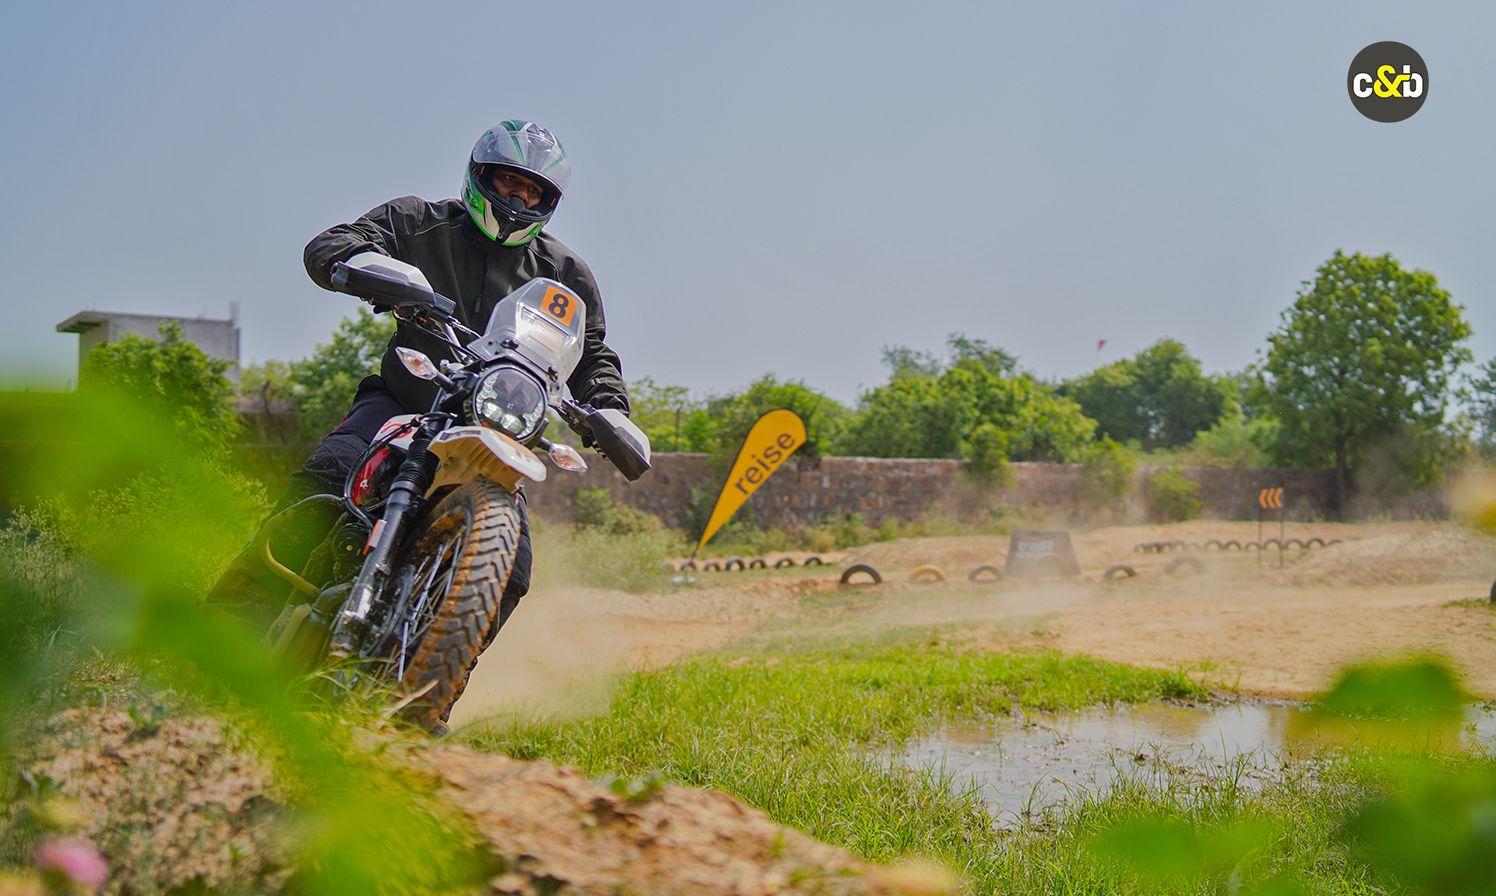 Toughing it out in the Delhi heat, we spend two days at Reise TrailR Off-Road academy and pick up a variety of off-road riding skills, under the watchful eyes of two Dakar veterans. 